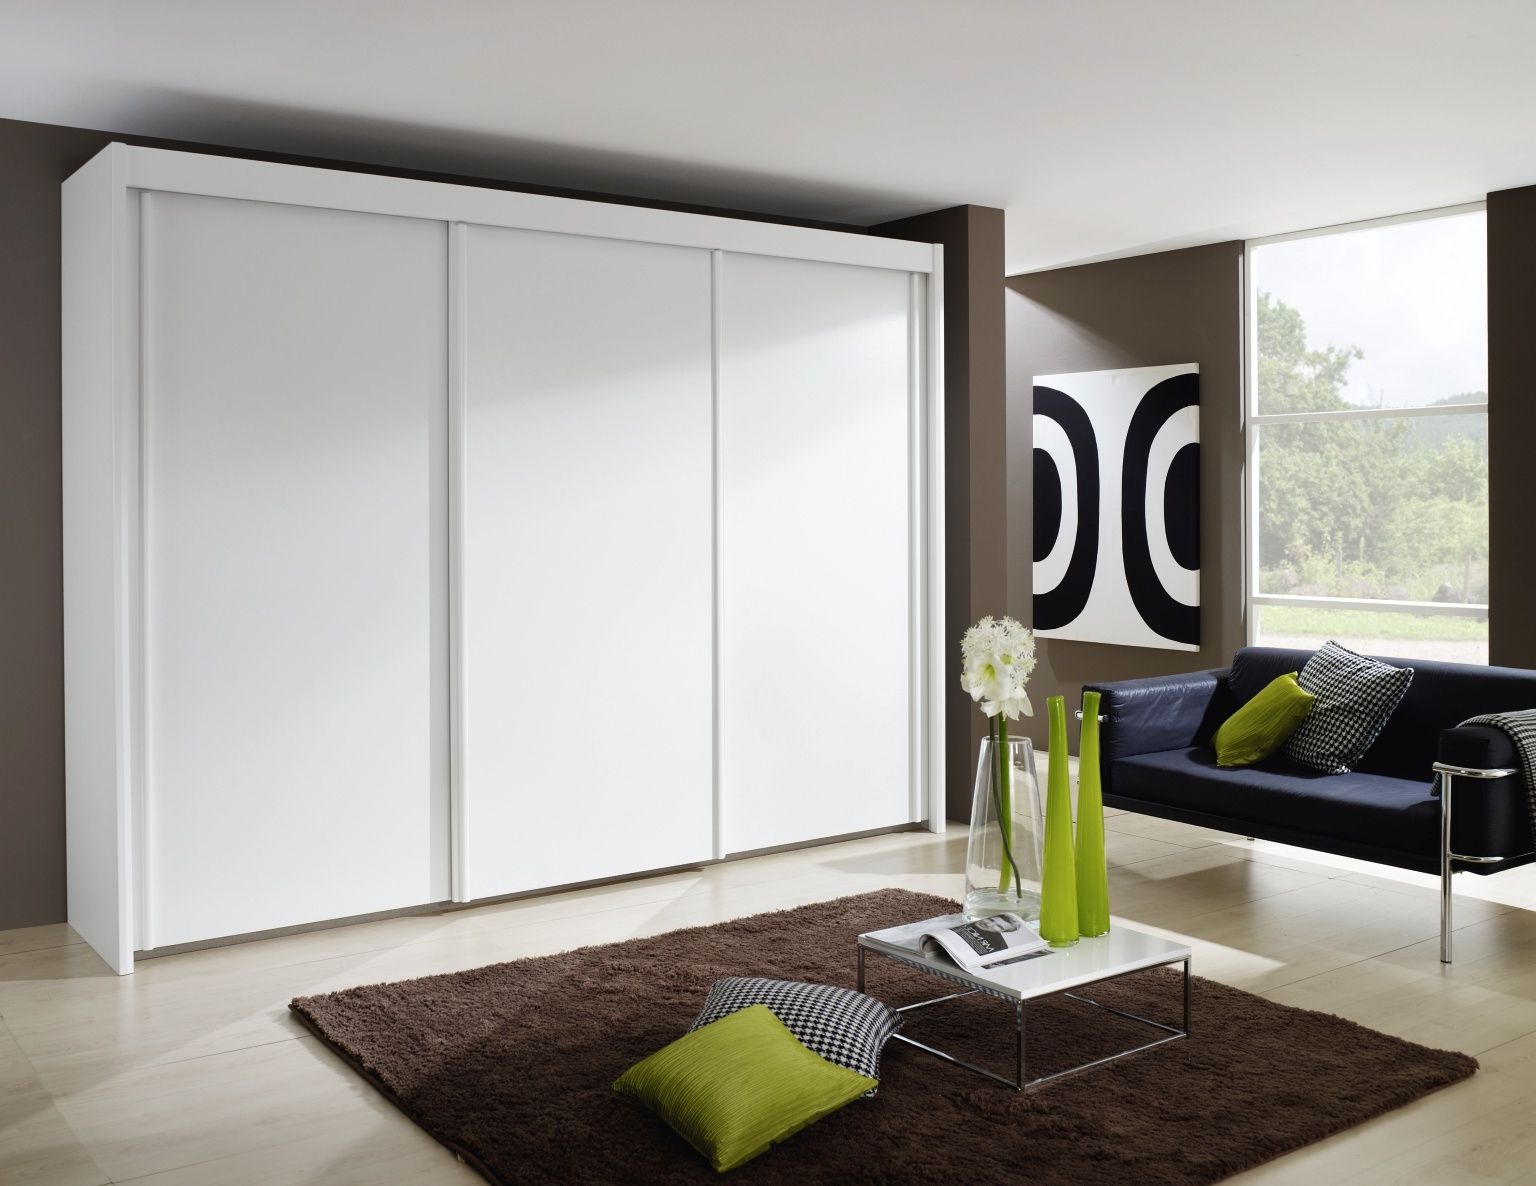 Rauch Imperial 3 Door Sliding Wardrobe In White – W 280cm – Cfs Furniture Uk With Regard To Rauch Imperial Wardrobes (View 9 of 20)